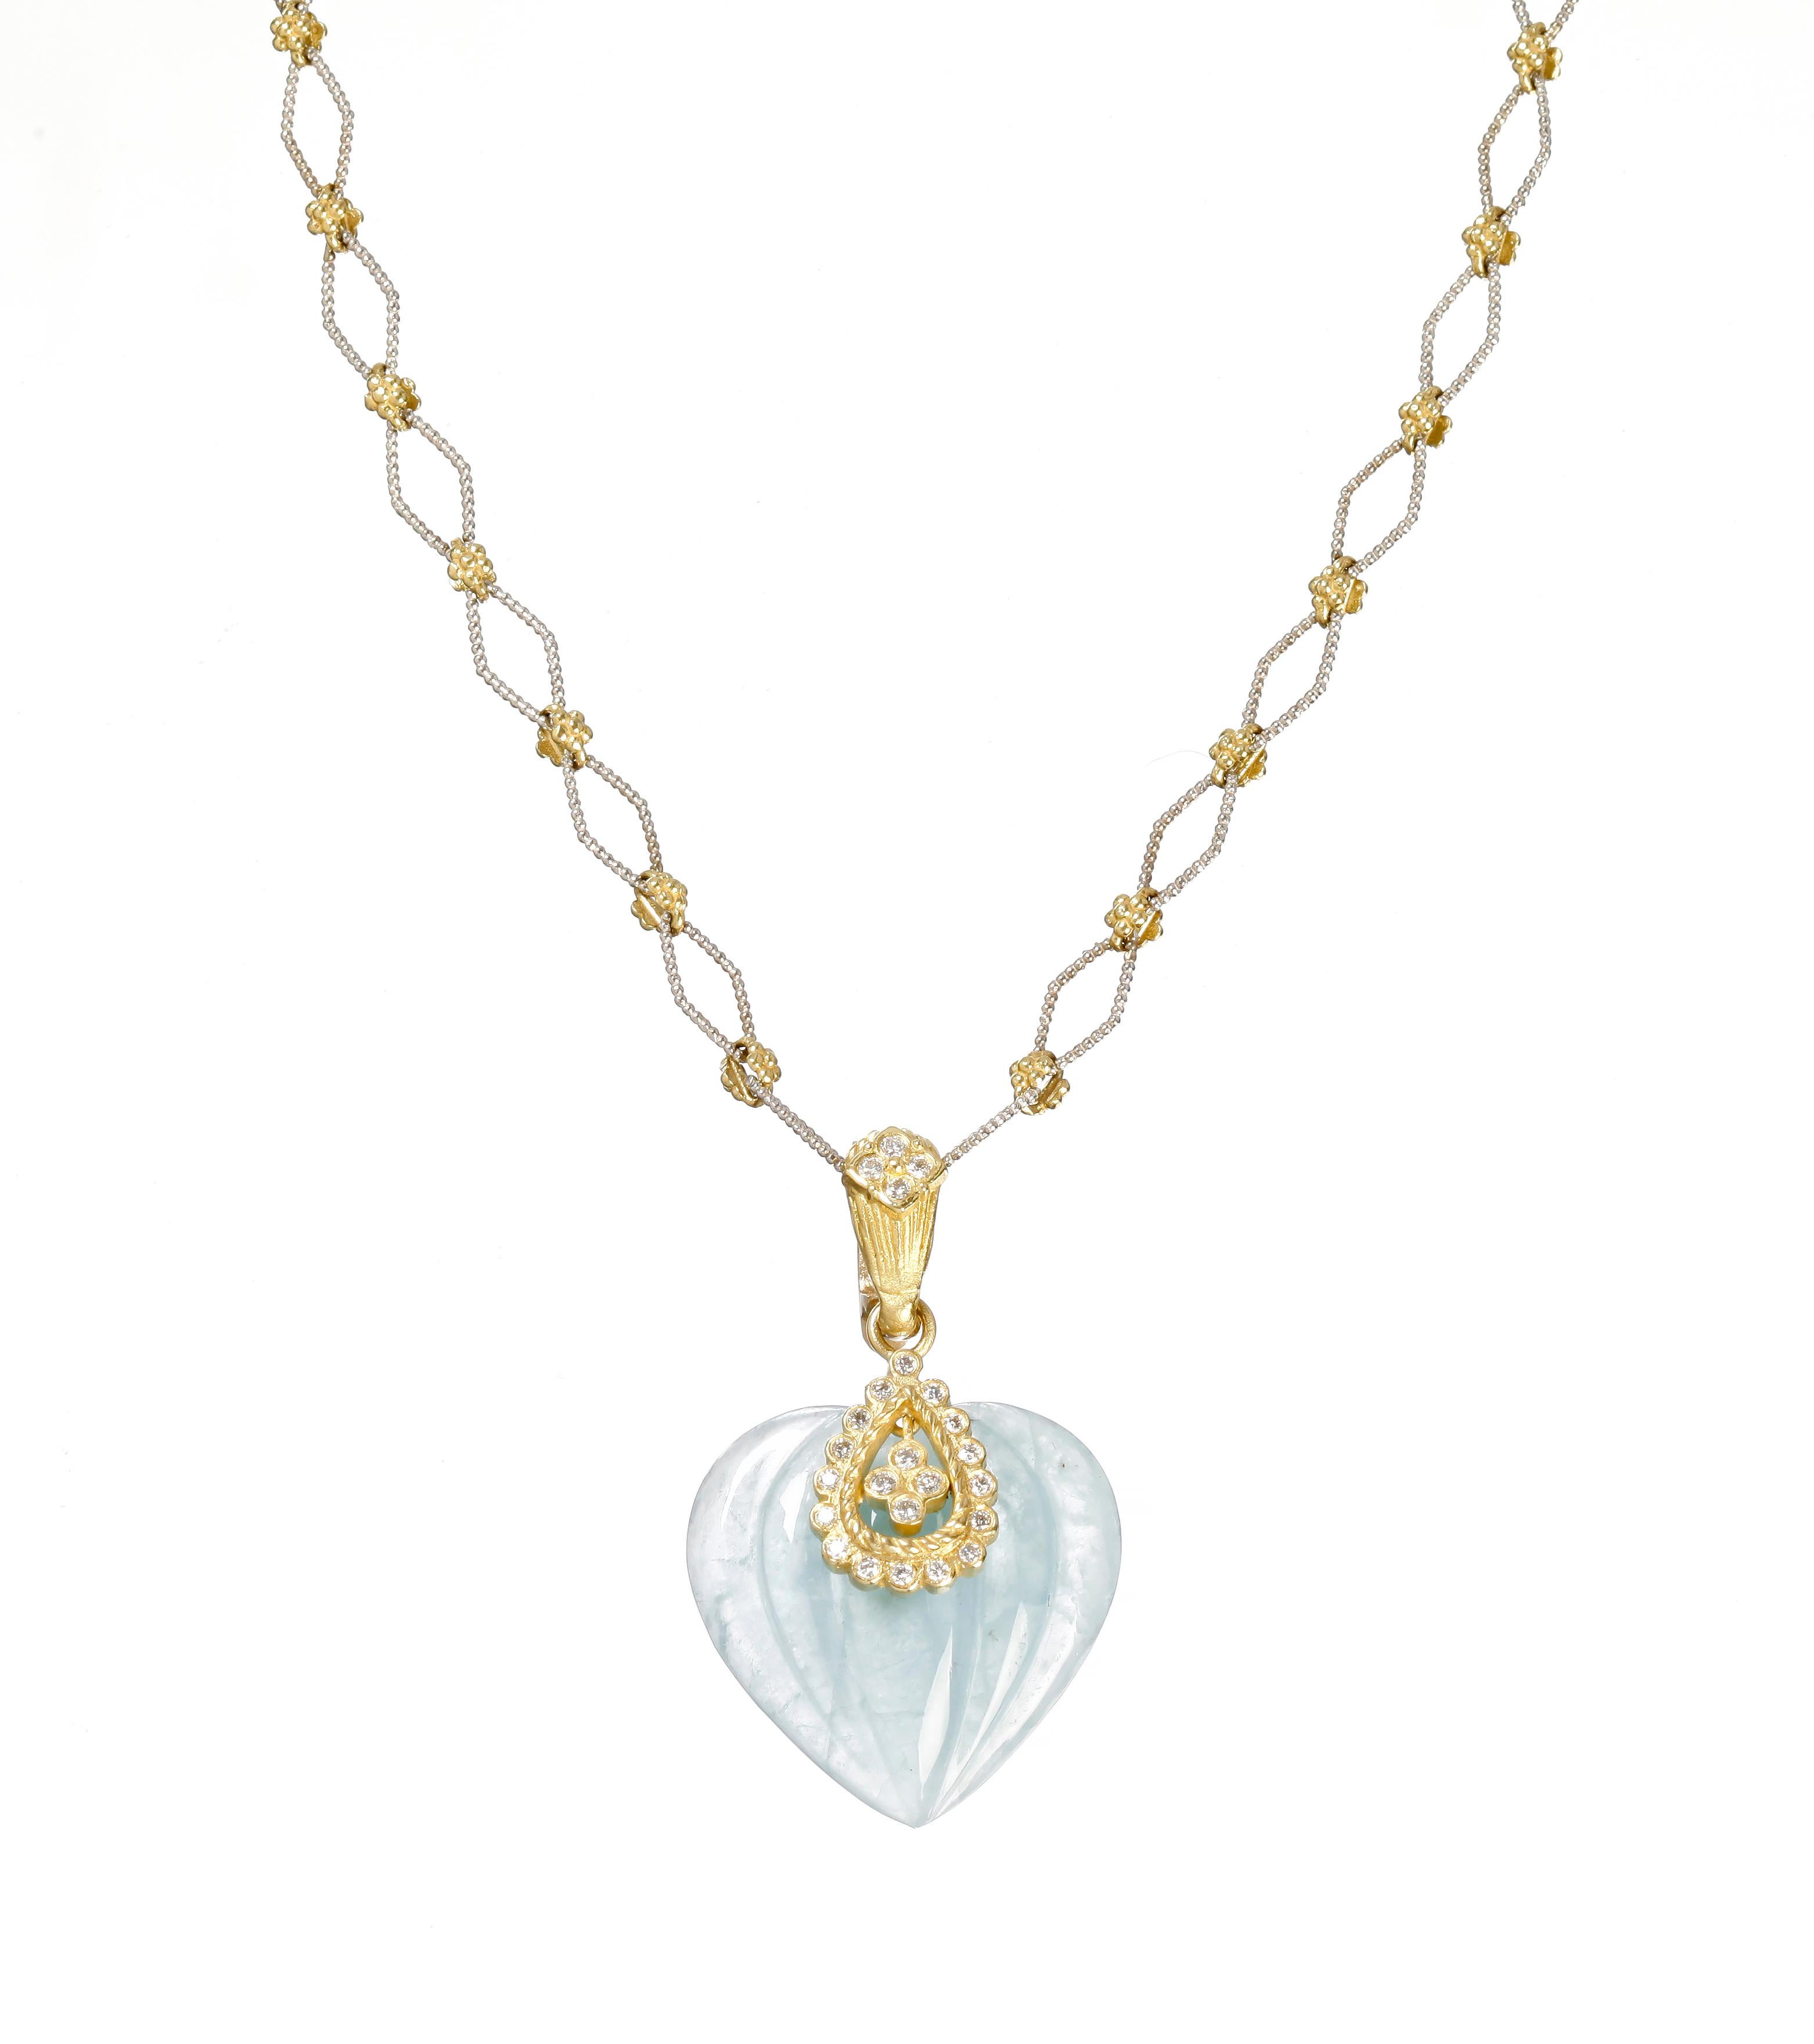 Stambolian Yellow Gold and Diamond Aquamarine Heart Pendant with Chain Necklace

Special-cut, Milky Aquamarine pendant has diamonds in the center and on bail. Heart clips on and off and can be worn separately.

0.30 carat G color VS clarity